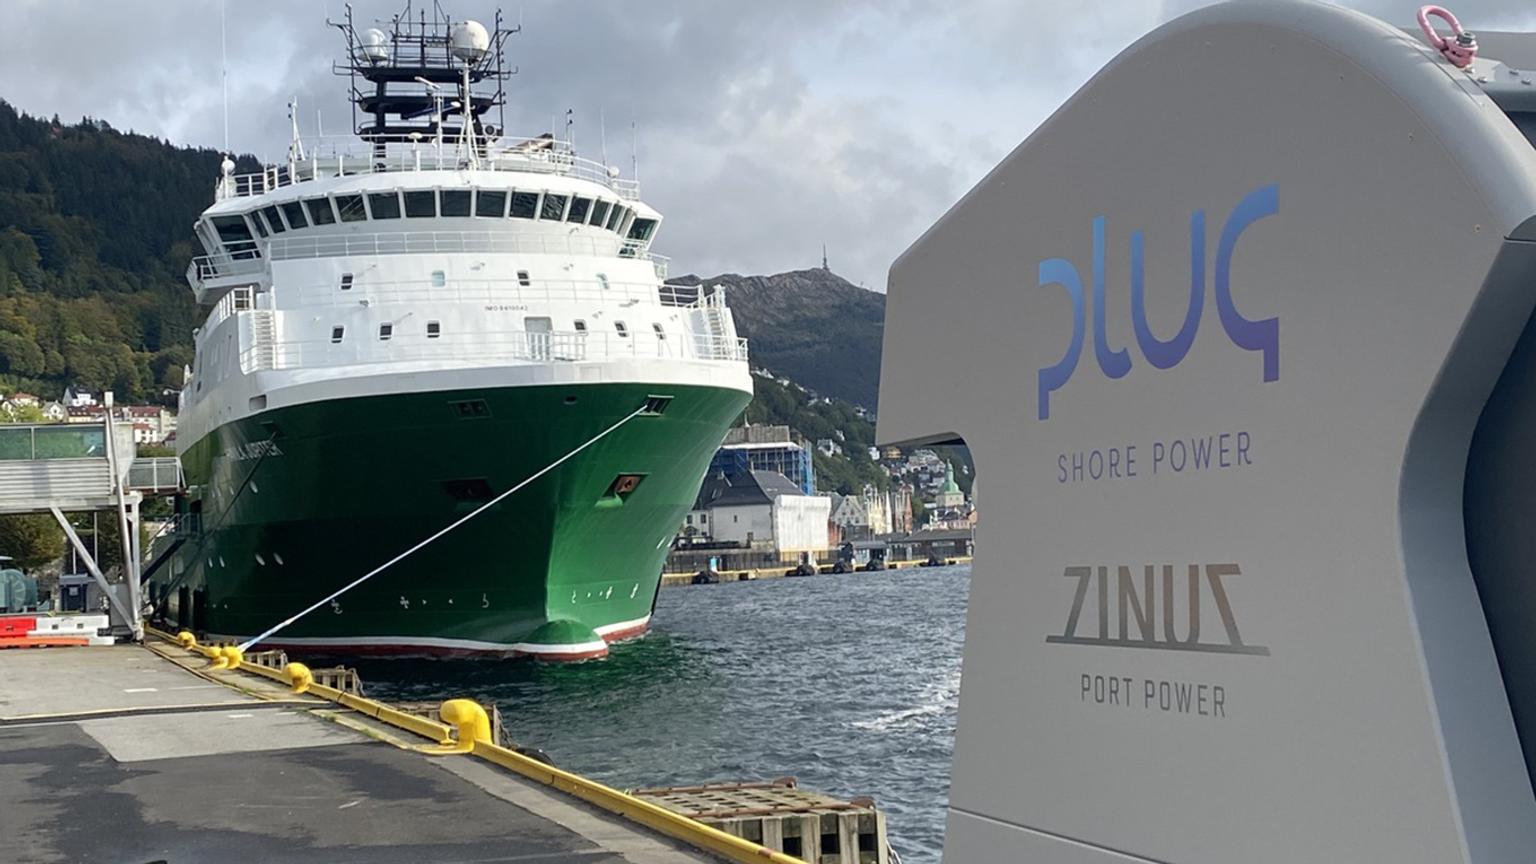 A Zinus plug at the port in Bergen - Green Maritime